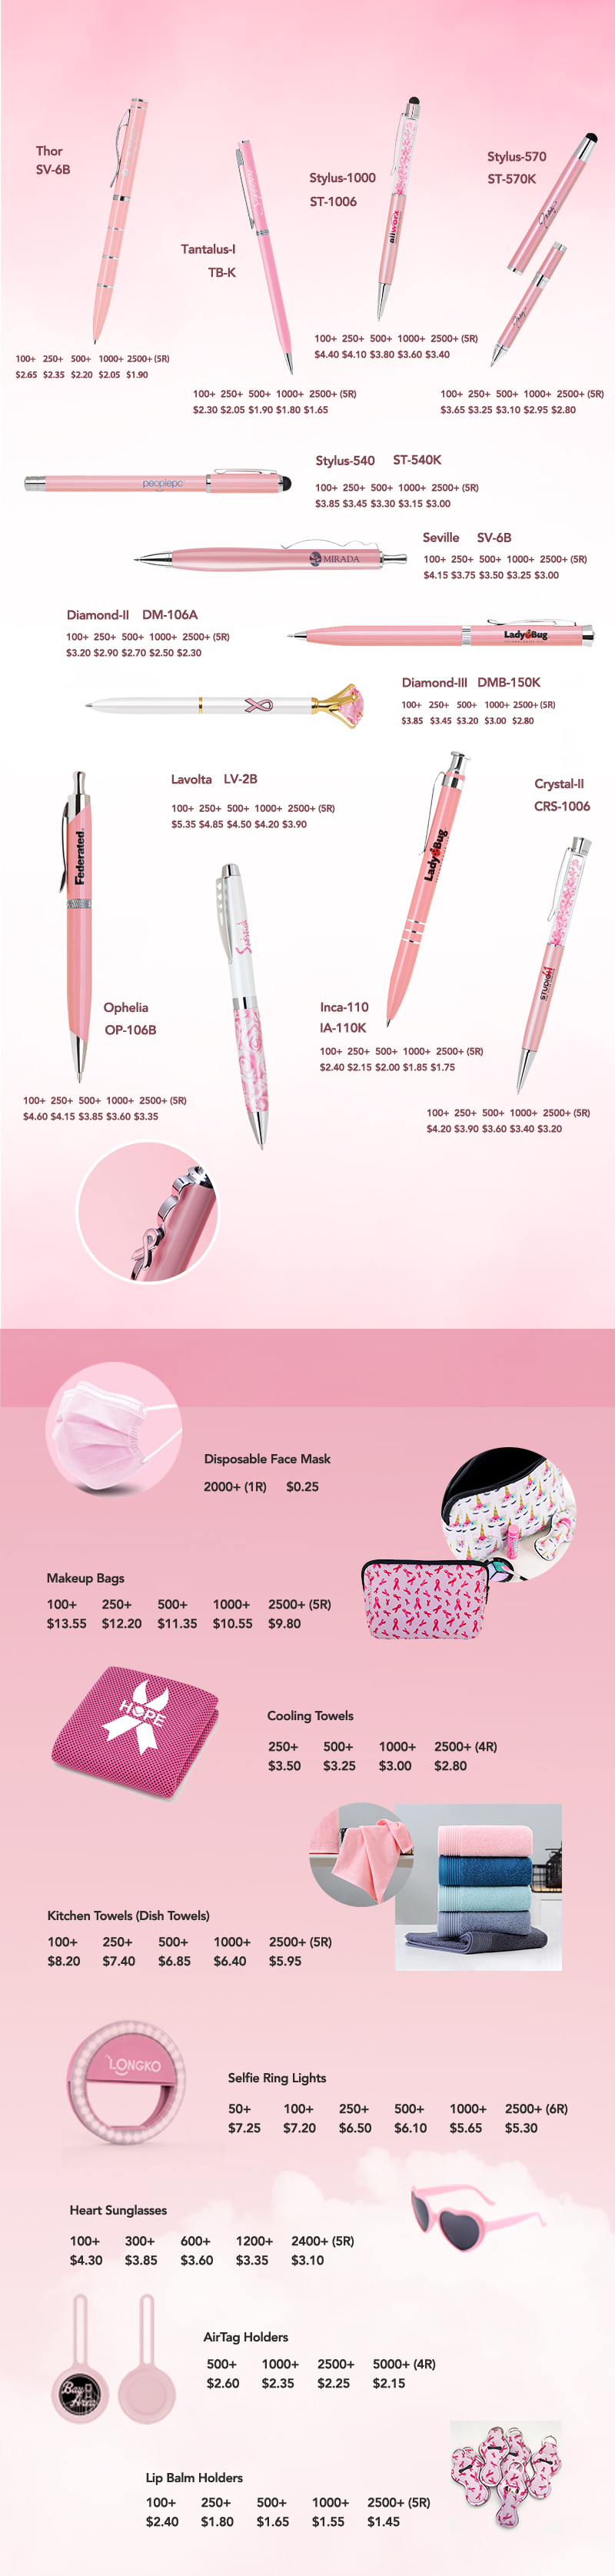 Lungsal's Breast Cancer Awareness Products